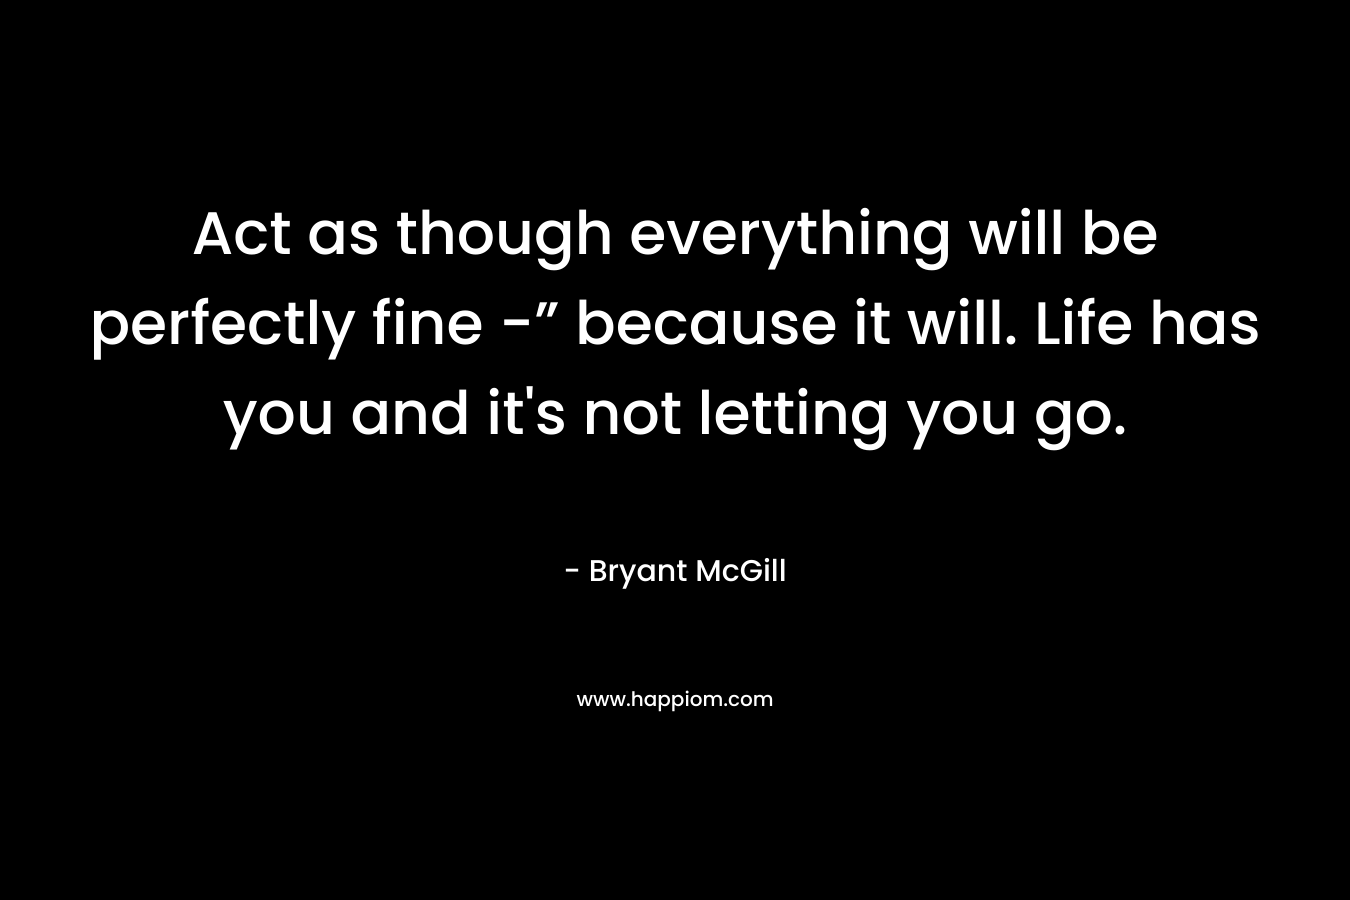 Act as though everything will be perfectly fine -” because it will. Life has you and it's not letting you go.